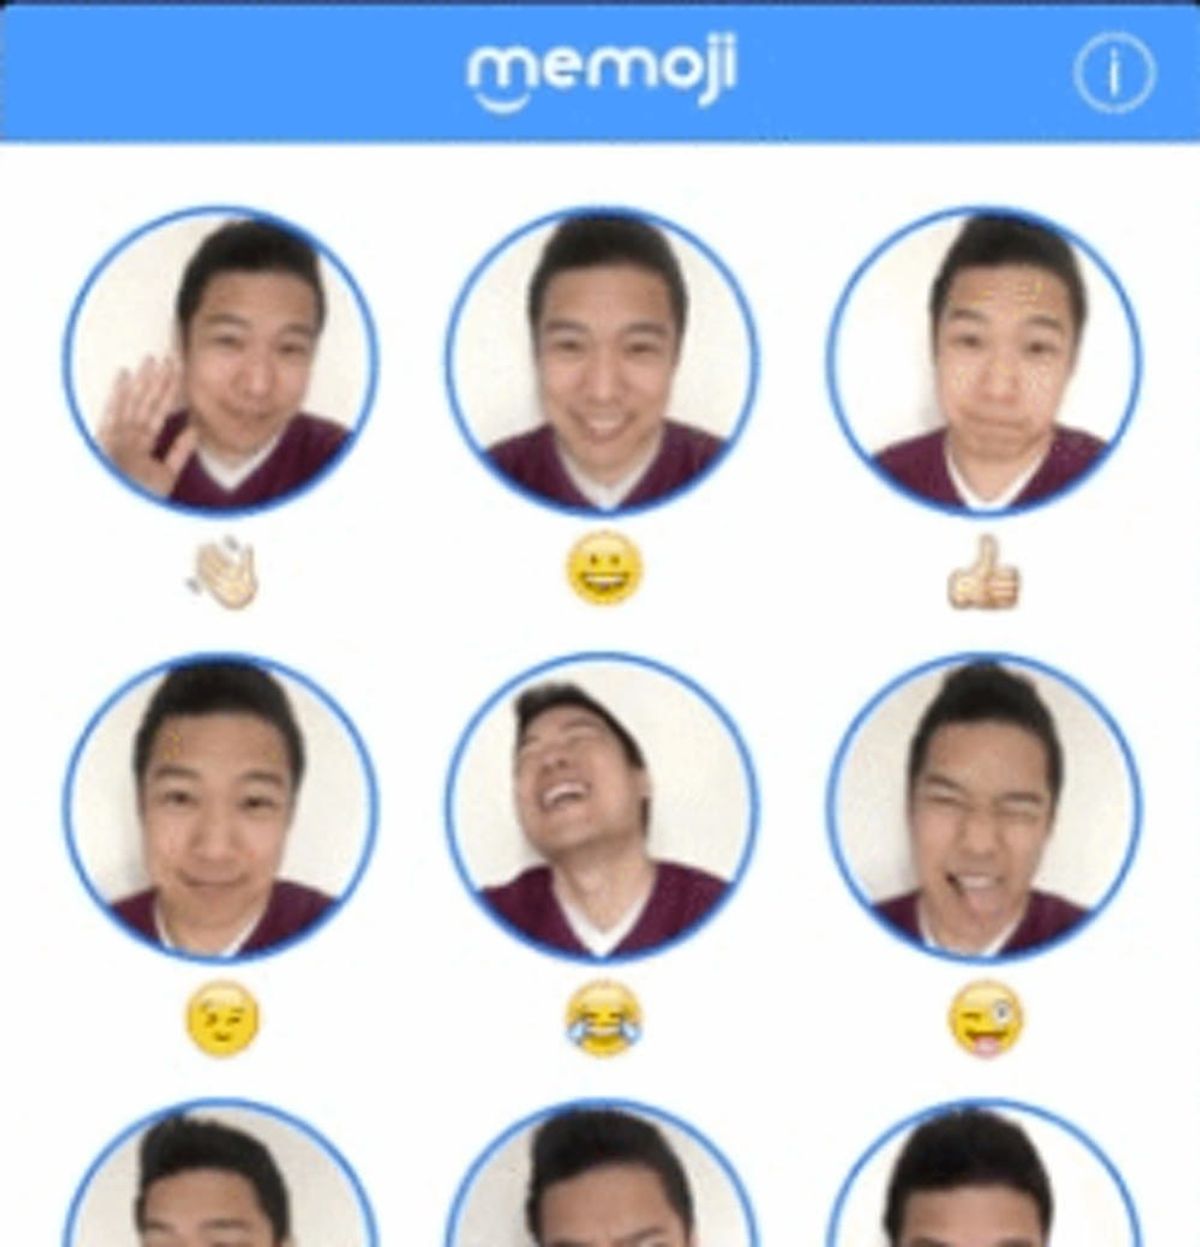 This App Lets You Turn Your Face into Emoji